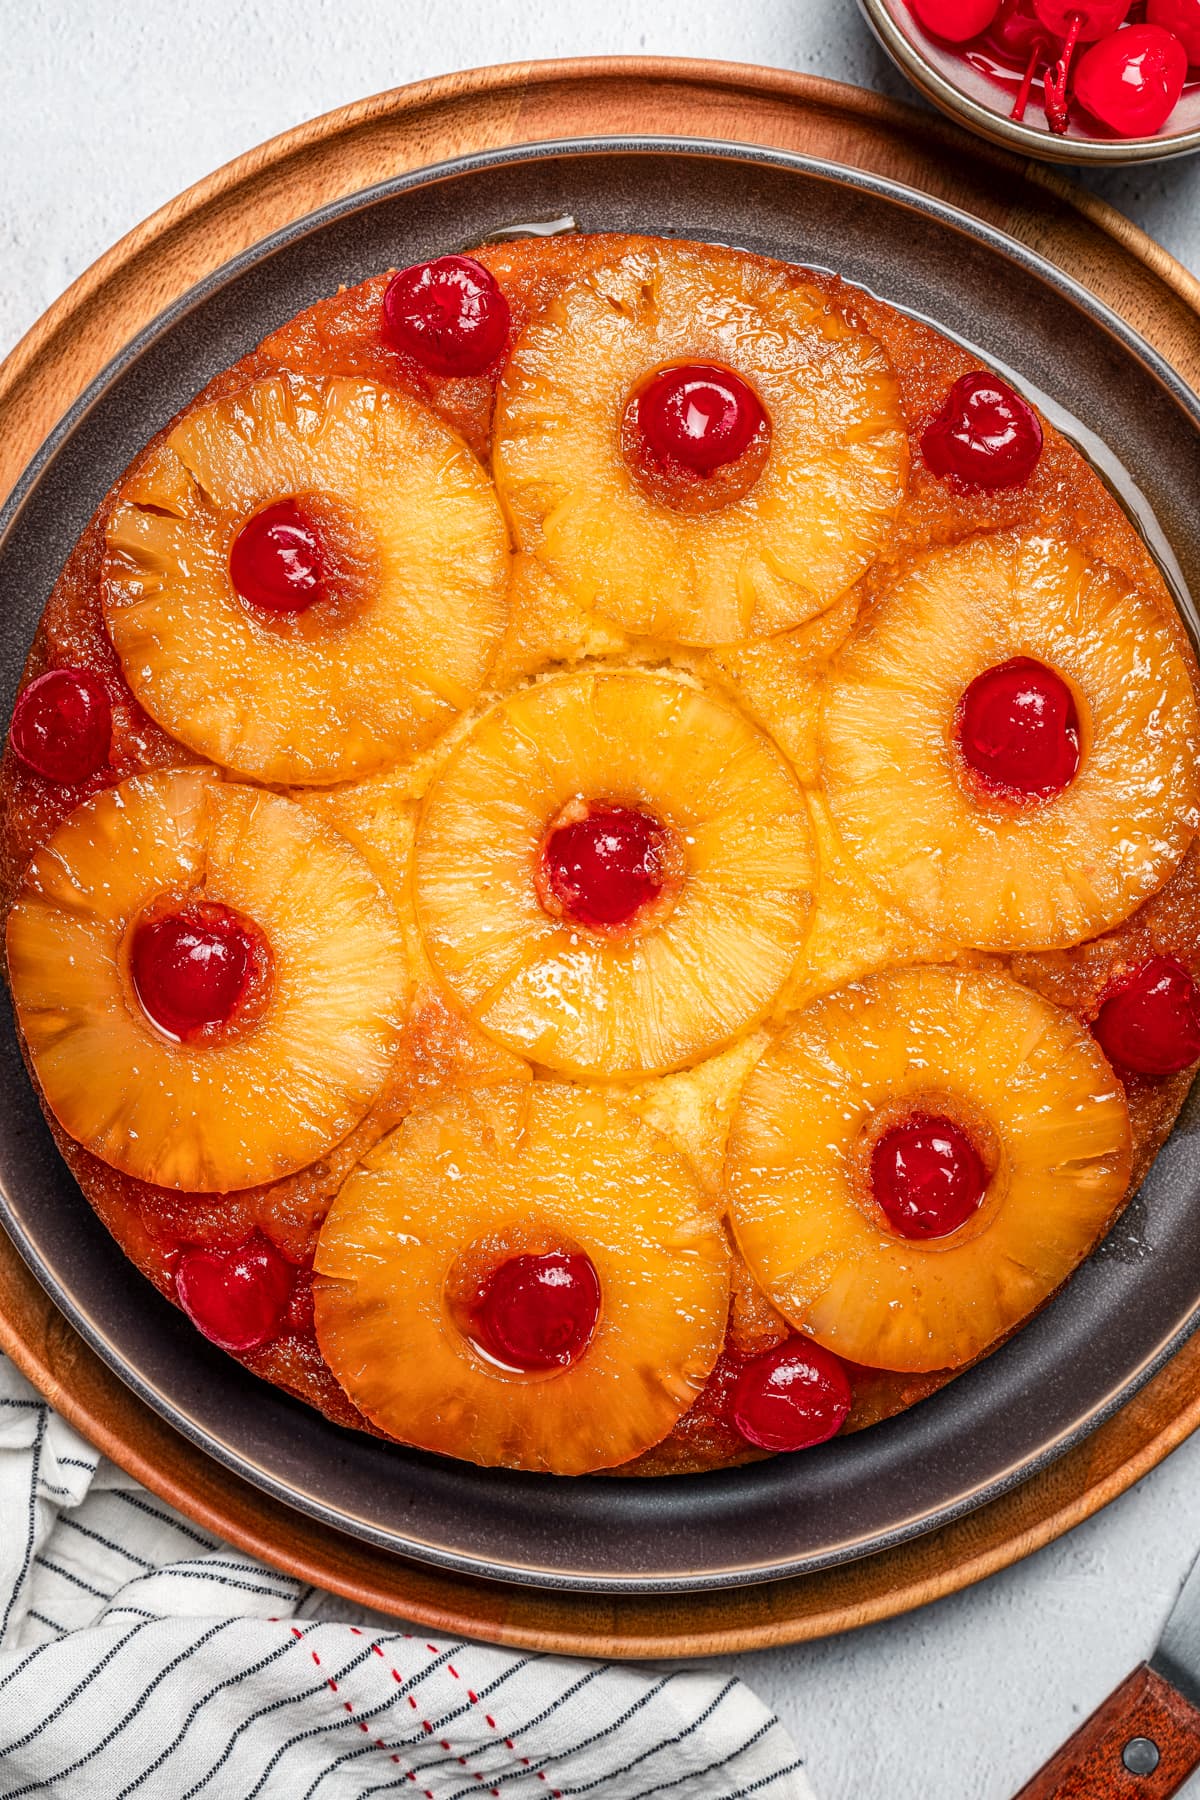 Close-up overhead view of a pineapple upside-down cake on a plate.